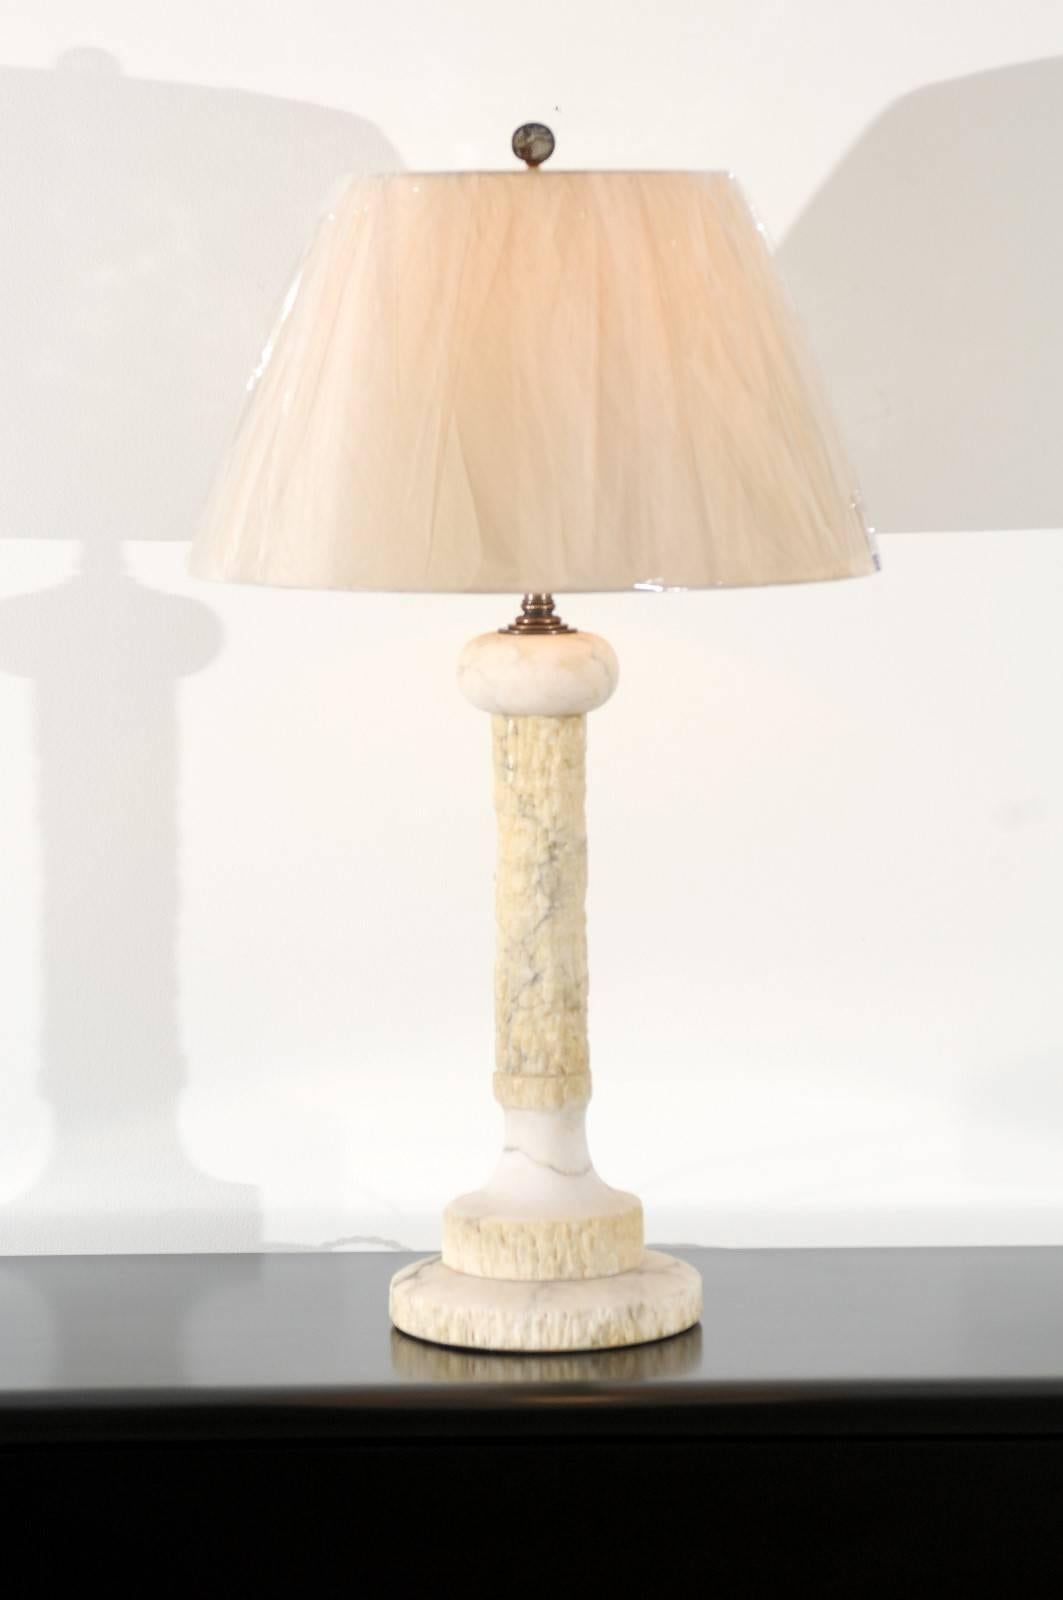 An exceptionally lovely pair of vintage modern honed marble lamps. Beautiful tree form design with fabulous texture replicating the look of tree bark. Wonderful weight and craftsmanship. While unmarked, the pieces are consistent with Italian marble